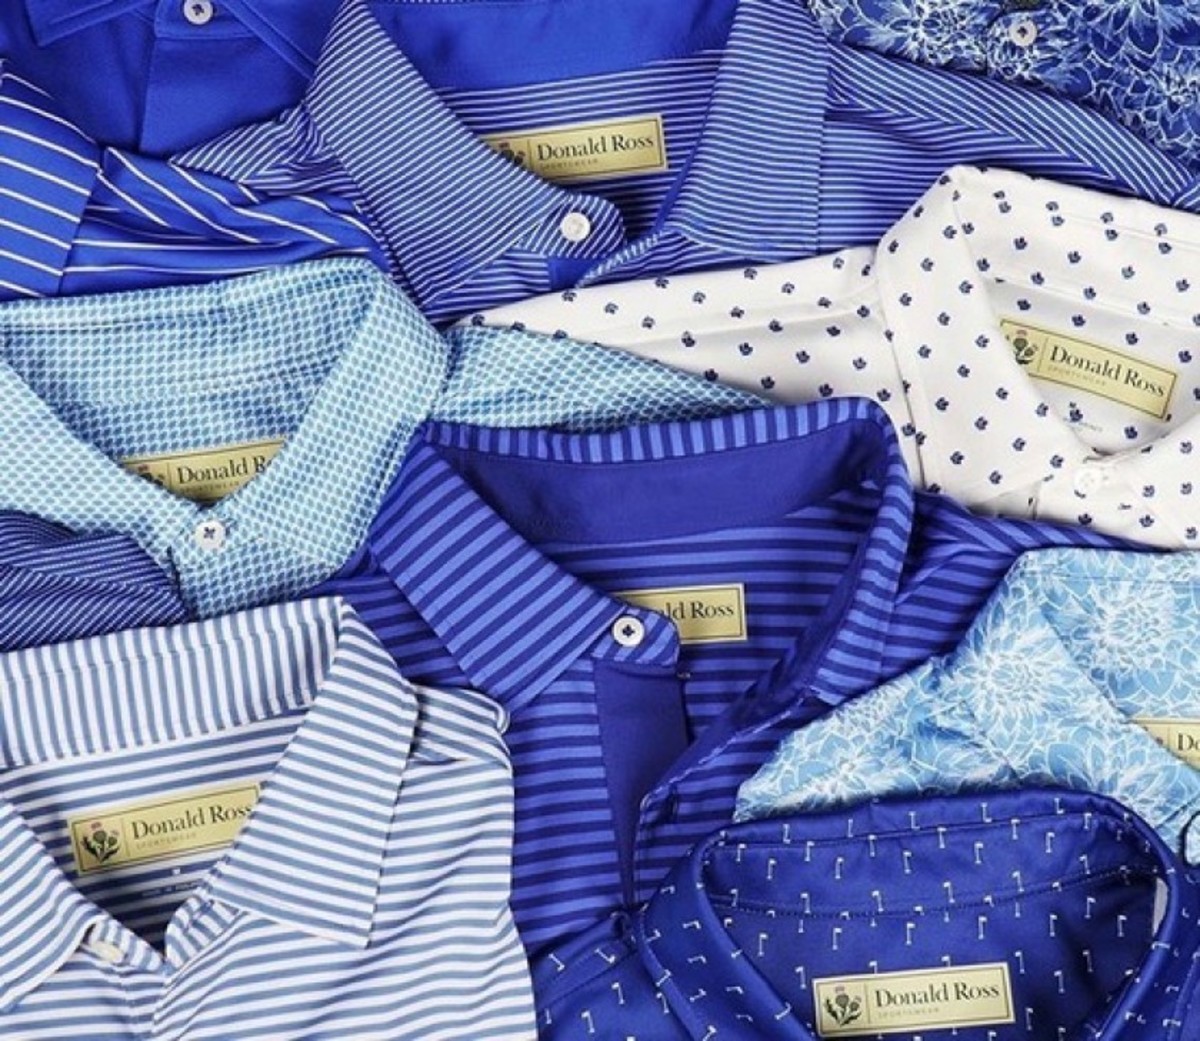 Donald Ross Sportswear's micro-polyester jersey shirts have just about all that a golfer could ask for in performance and style.